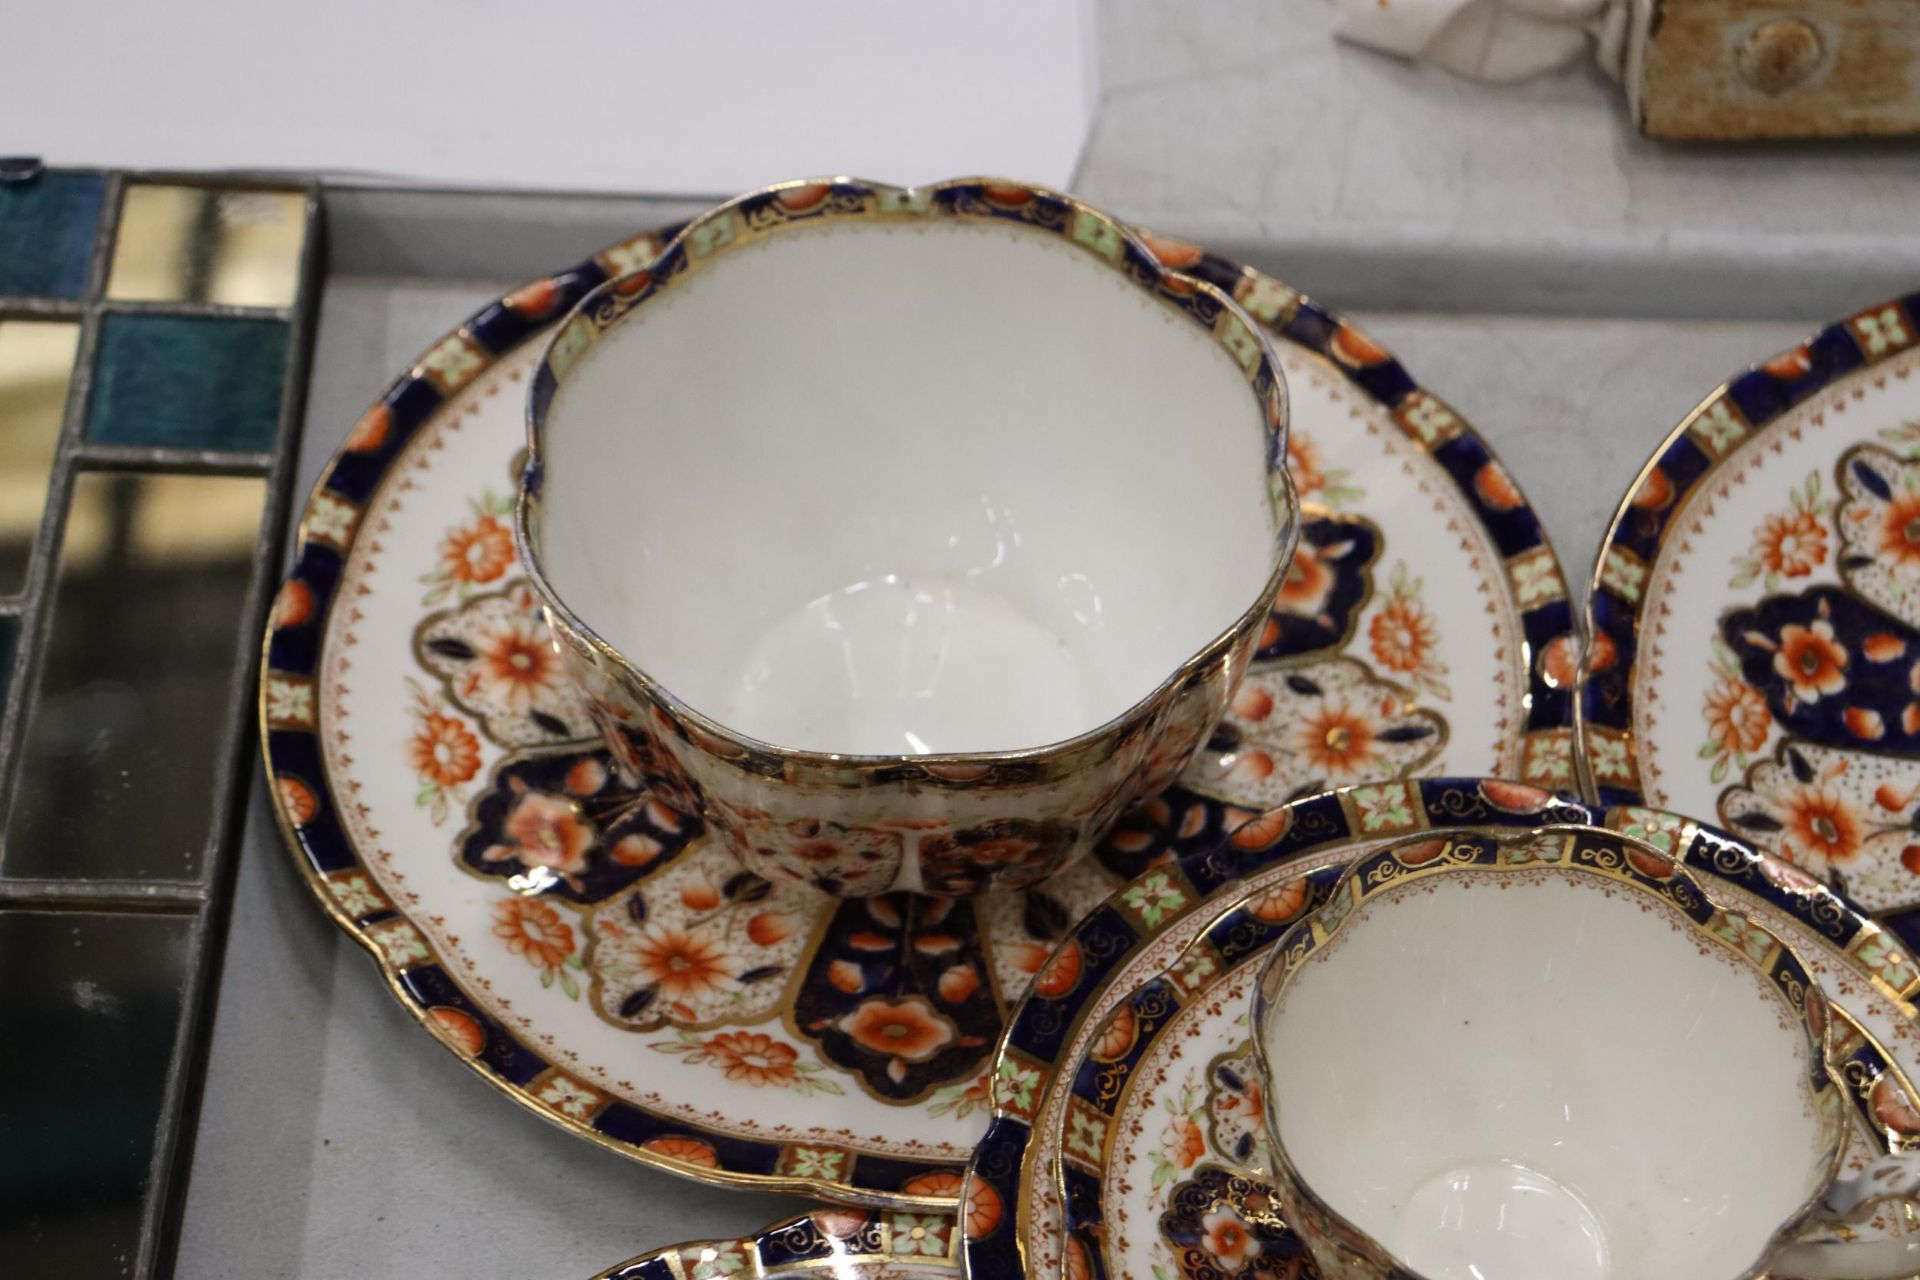 AN ANTIQUE 'COURT CHINA' TEASET TO INCLUDE CAKE PLATES, CUPS, SAUCERS, SIDE PLATES AND A SUGAR BOWL - Image 7 of 9